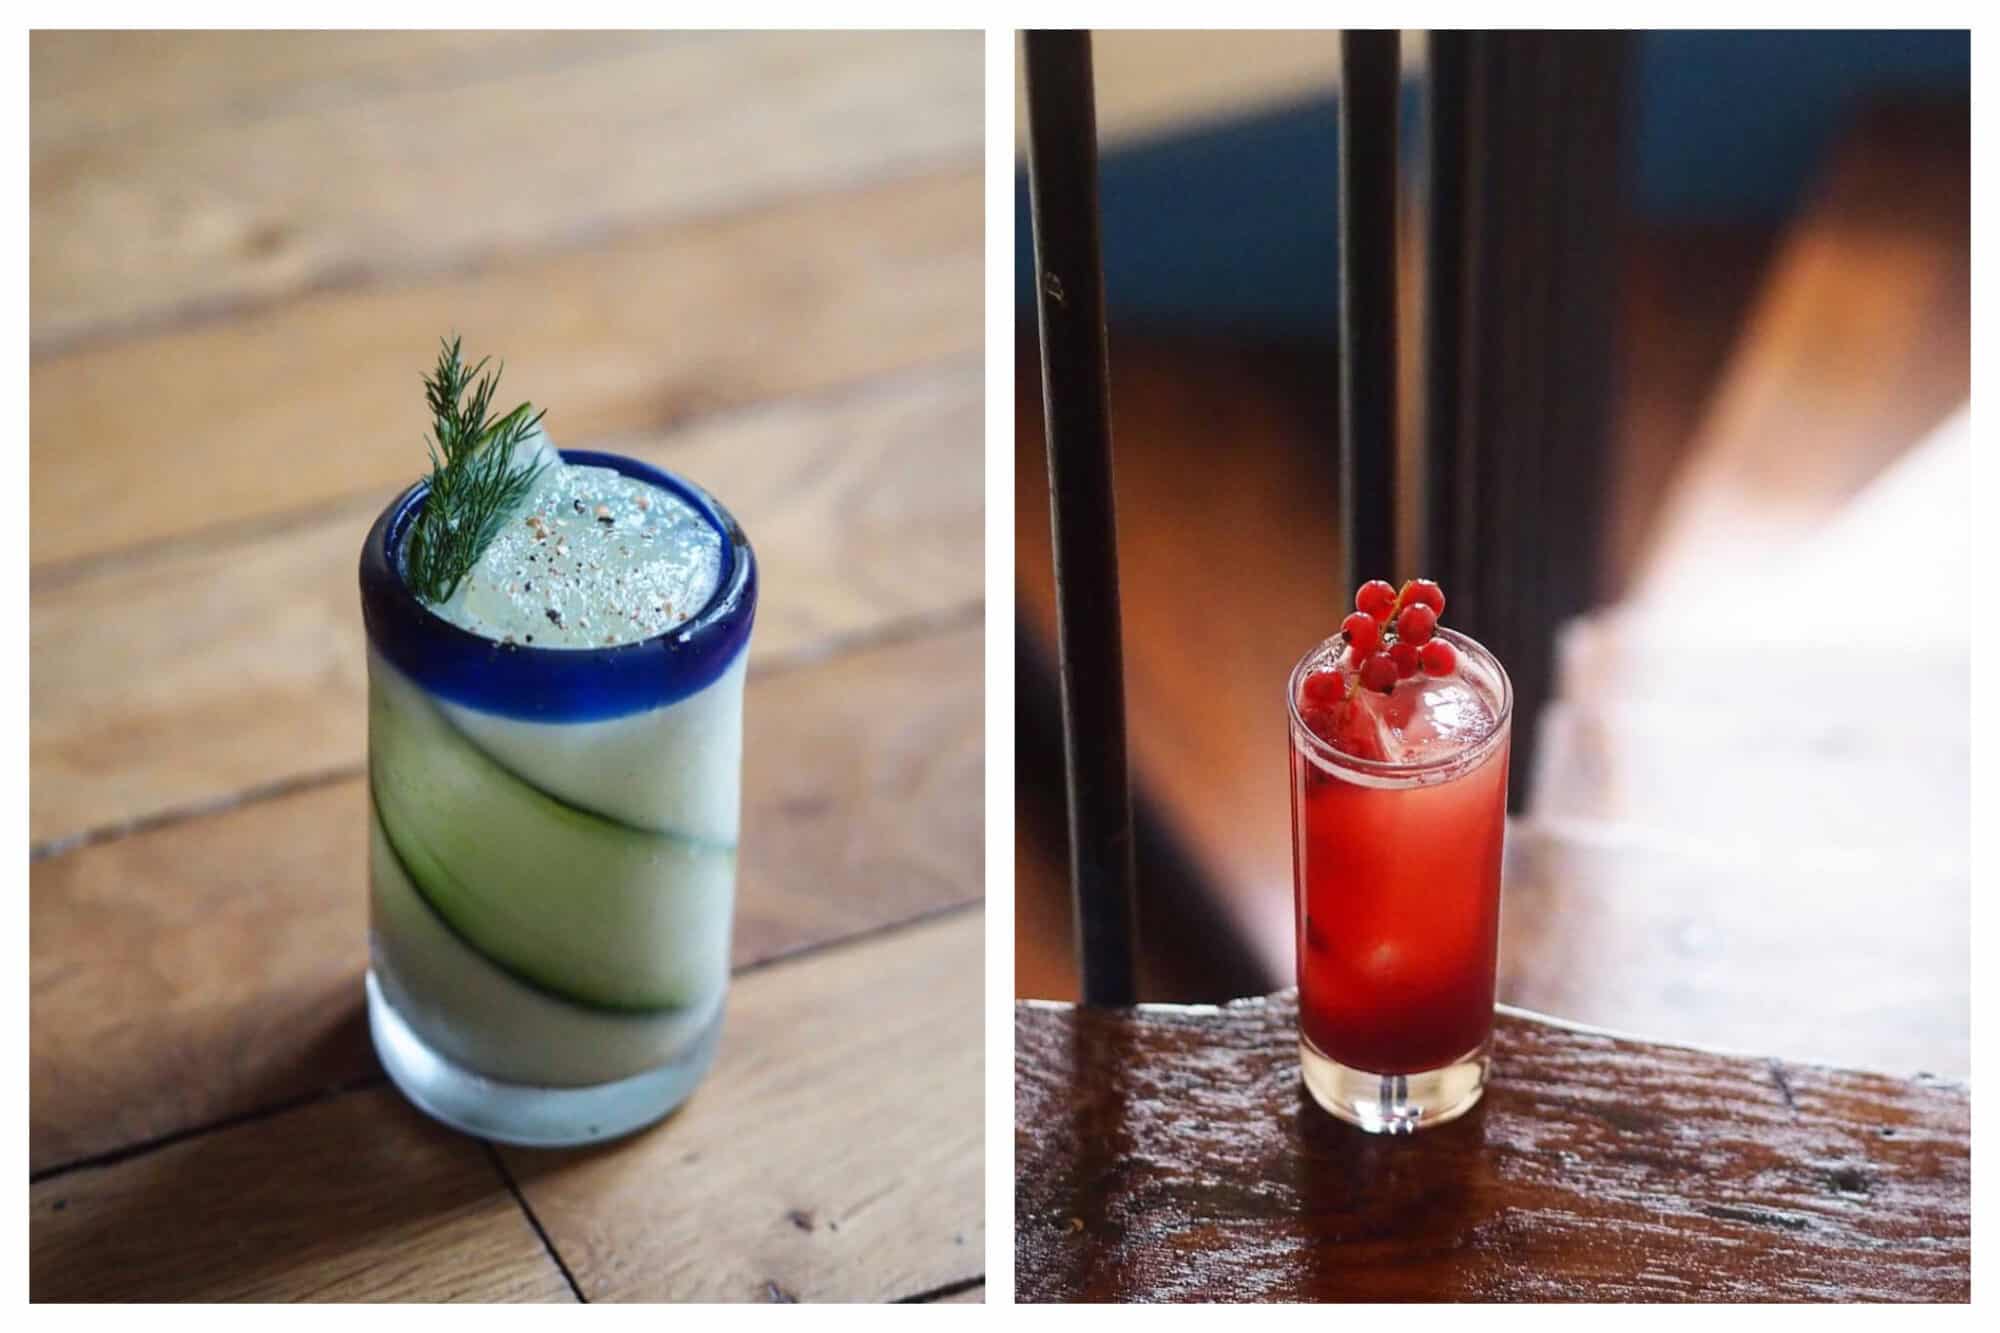 Left: a cocktail with a strip of cucumber inside on a wooden background. 
Right: a red cocktail with berries on top sitting on a step of a wooden staircase. 